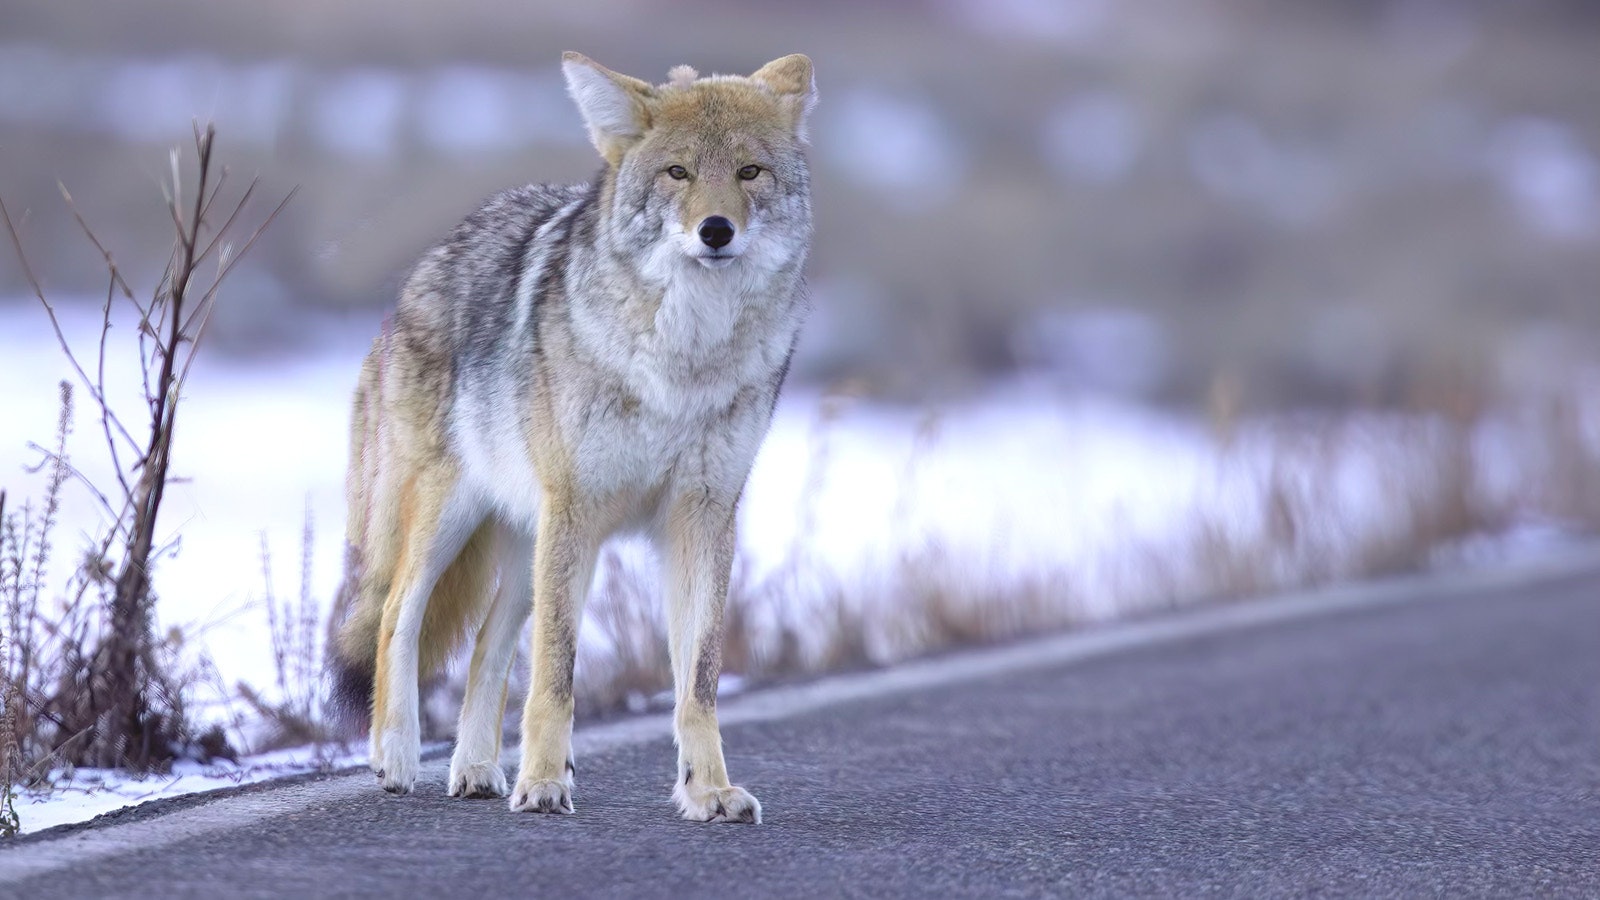 Limpy, a coyote that lives in the Larmar area of Yellowstone National Park, has mastered looking pathetic for tourists, in hopes of getting snacks. Feeding wildlife is strictly forbidden in Yellowstone.